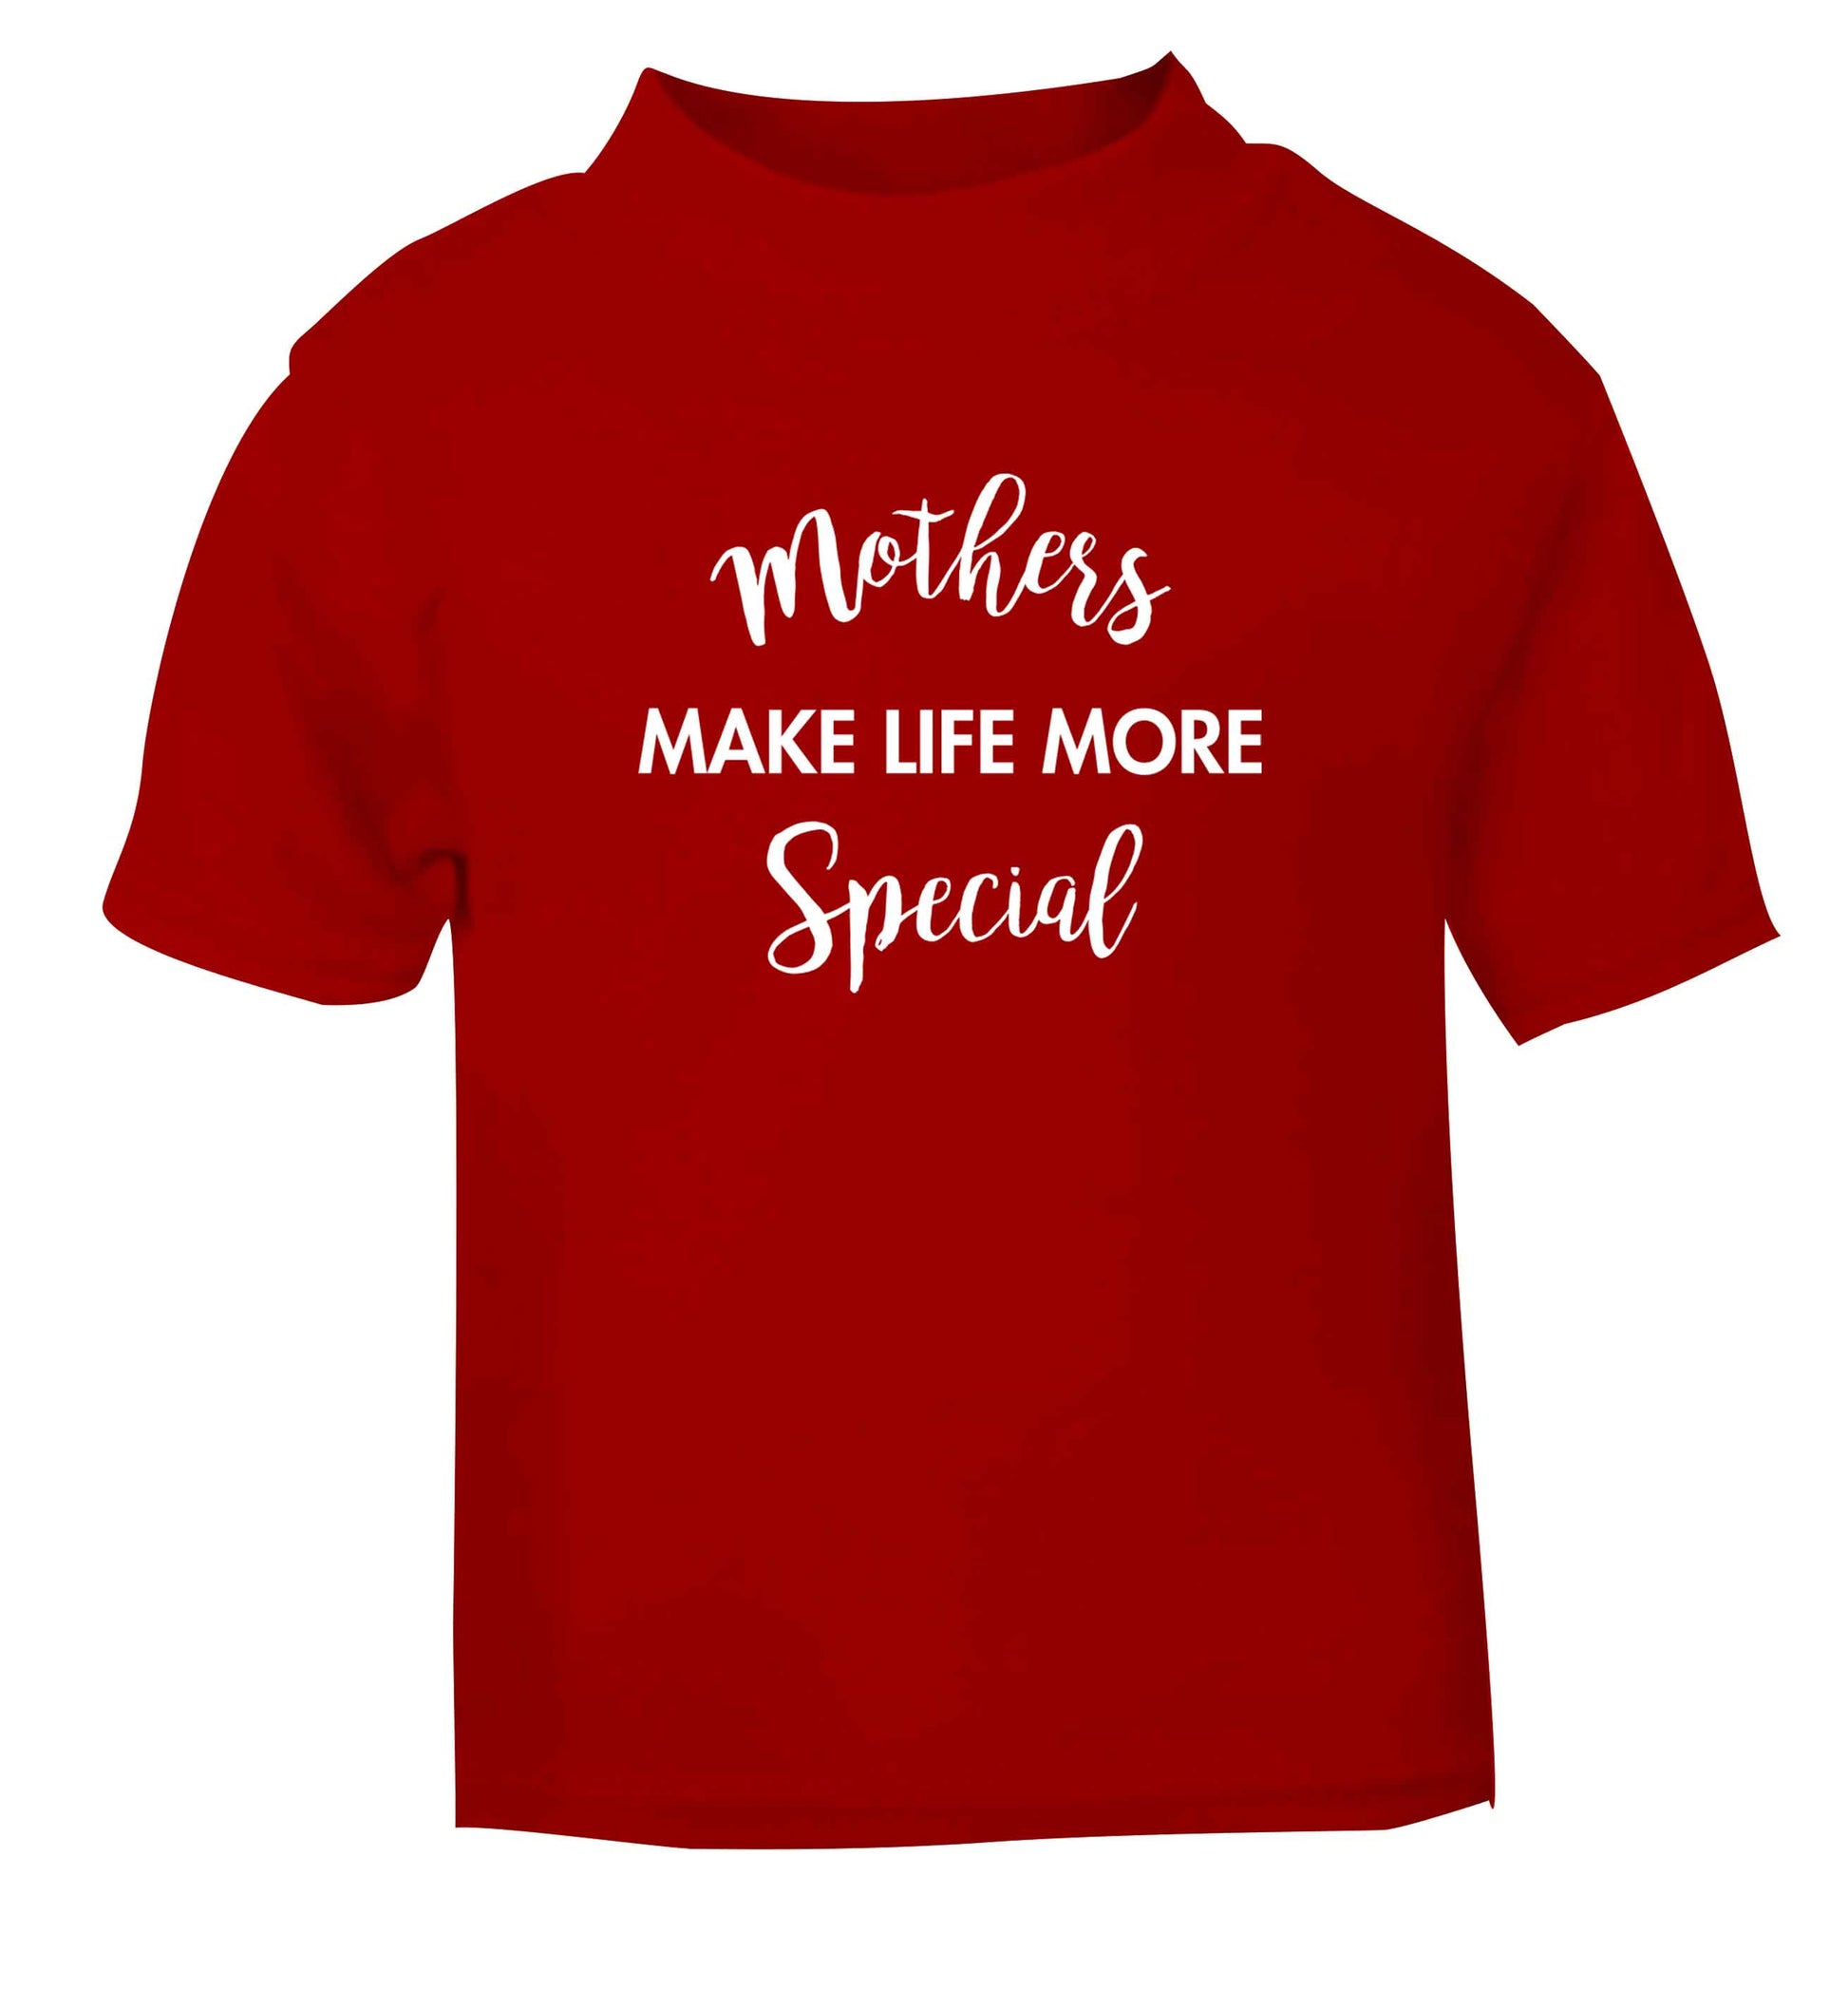 Mother's make life more special red baby toddler Tshirt 2 Years